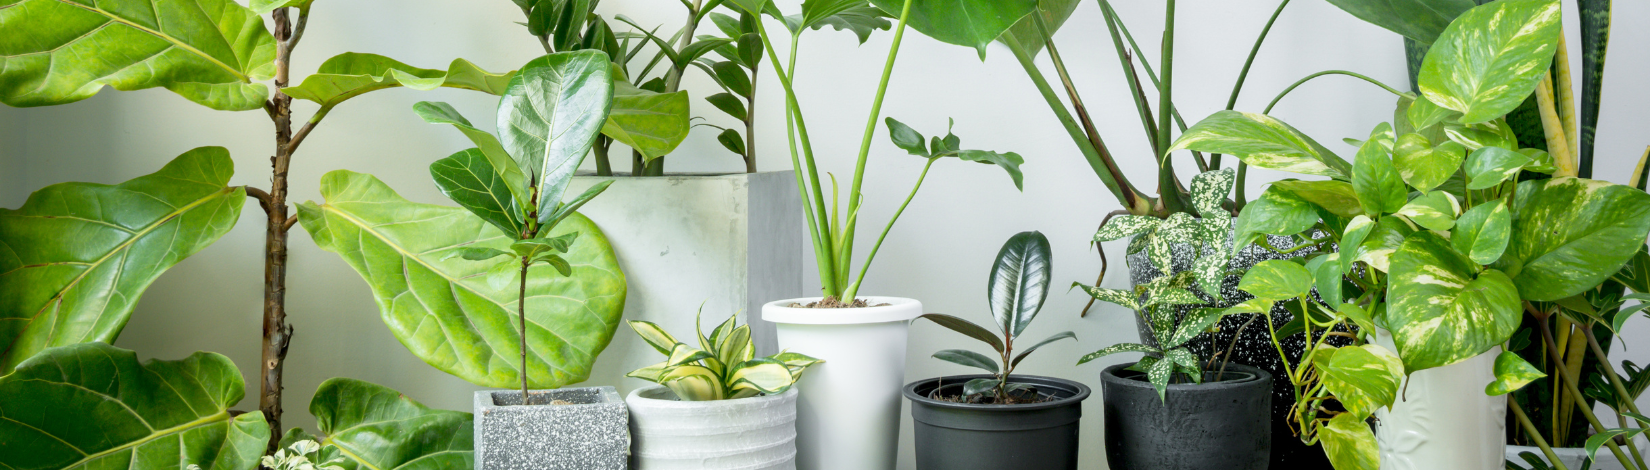 Gardening Q&A: Does joining the houseplant craze tempt you? - UF/IFAS ...